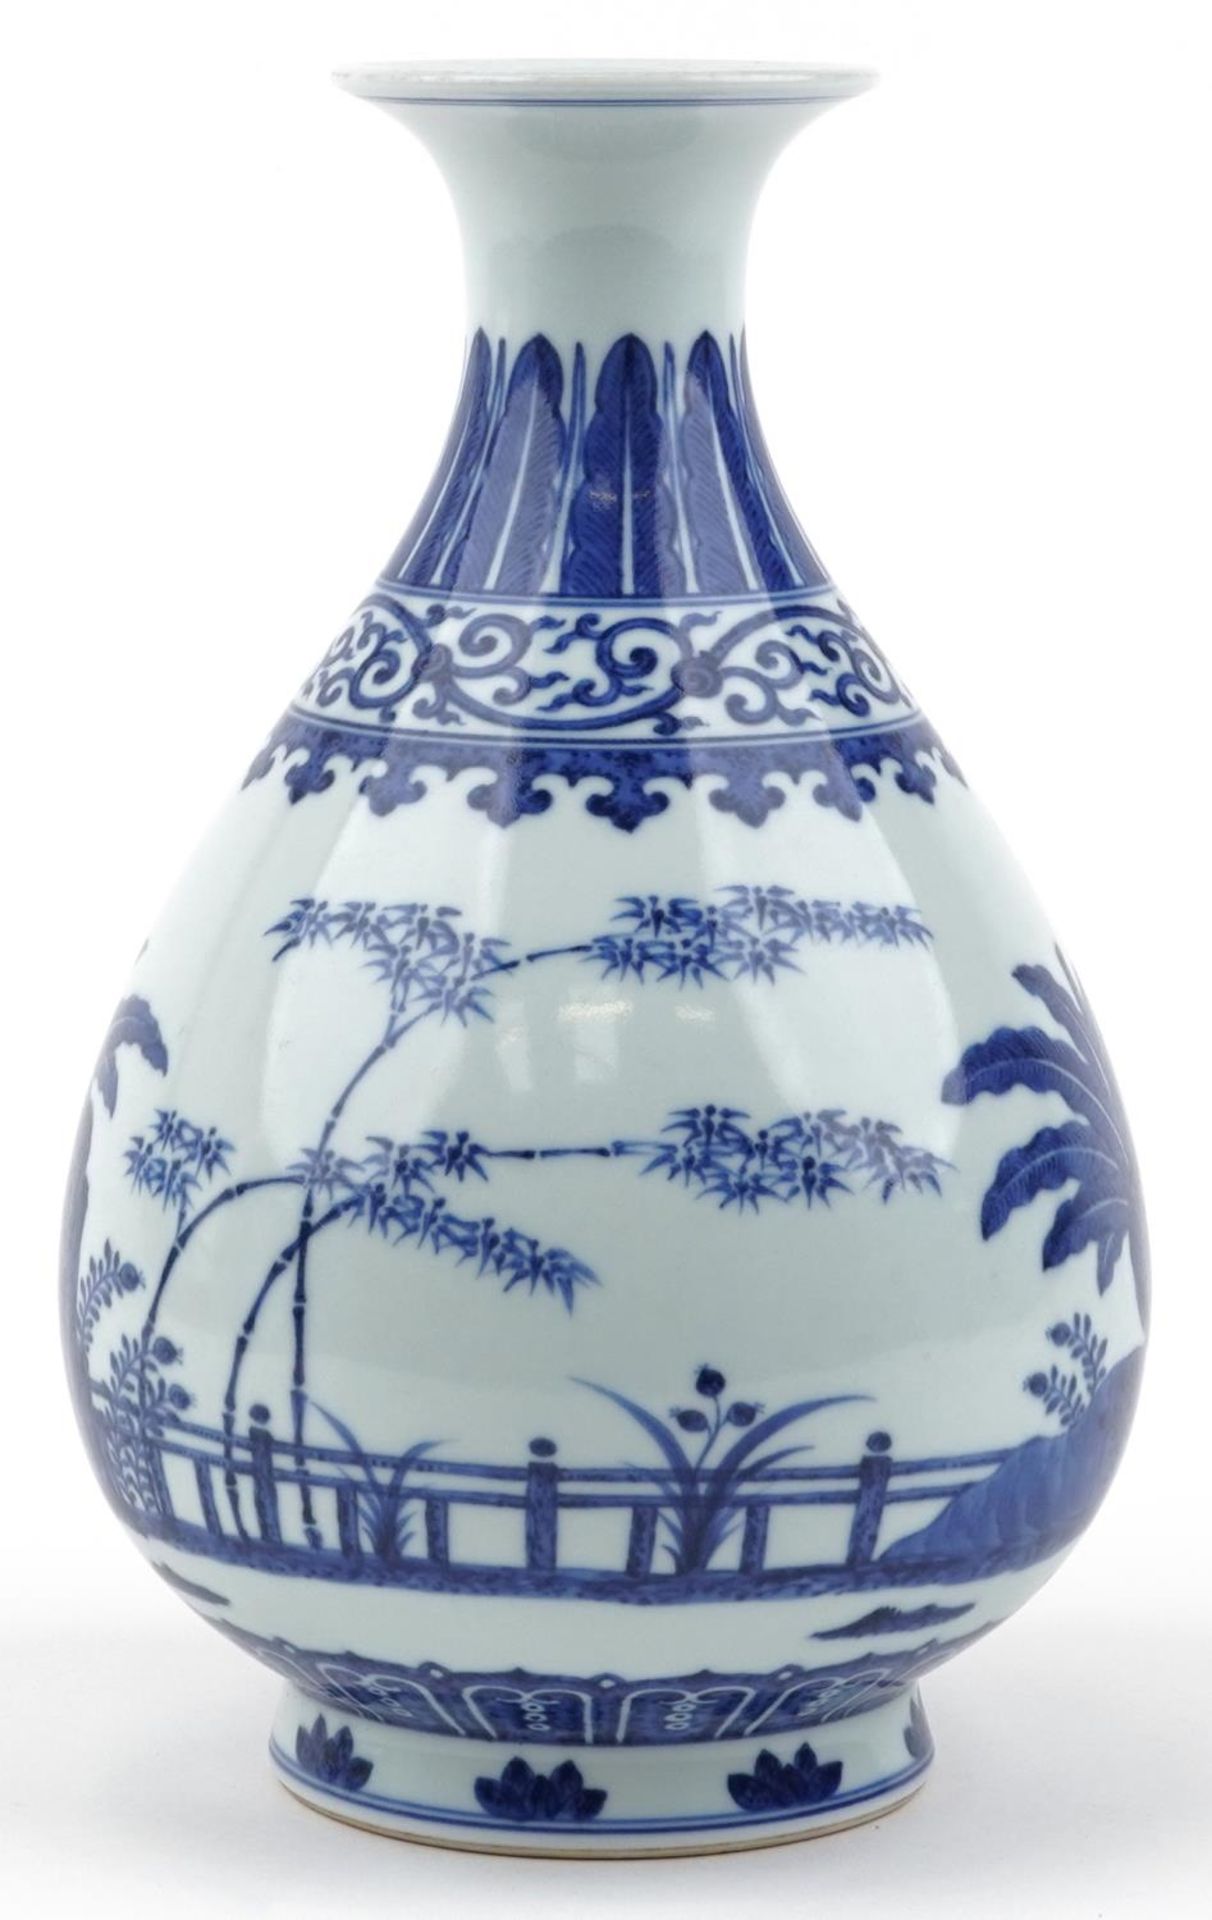 Chinese blue and white porcelain vase hand painted with a palace setting, six figure character marks - Image 2 of 6